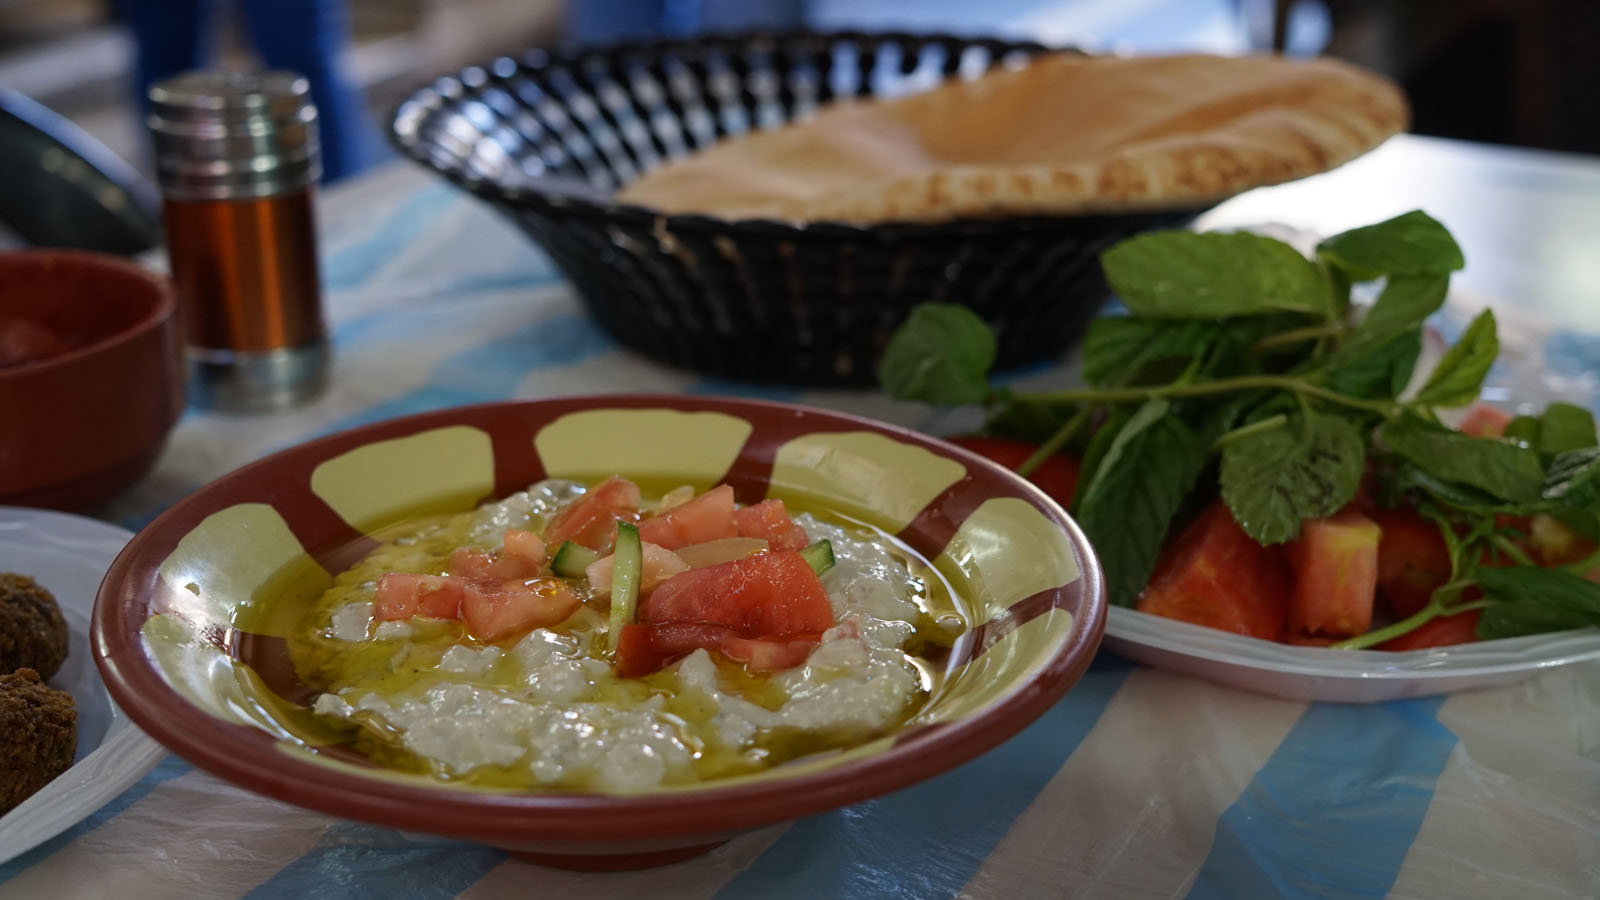 Jordan food and drink: 10 must try there | Travel